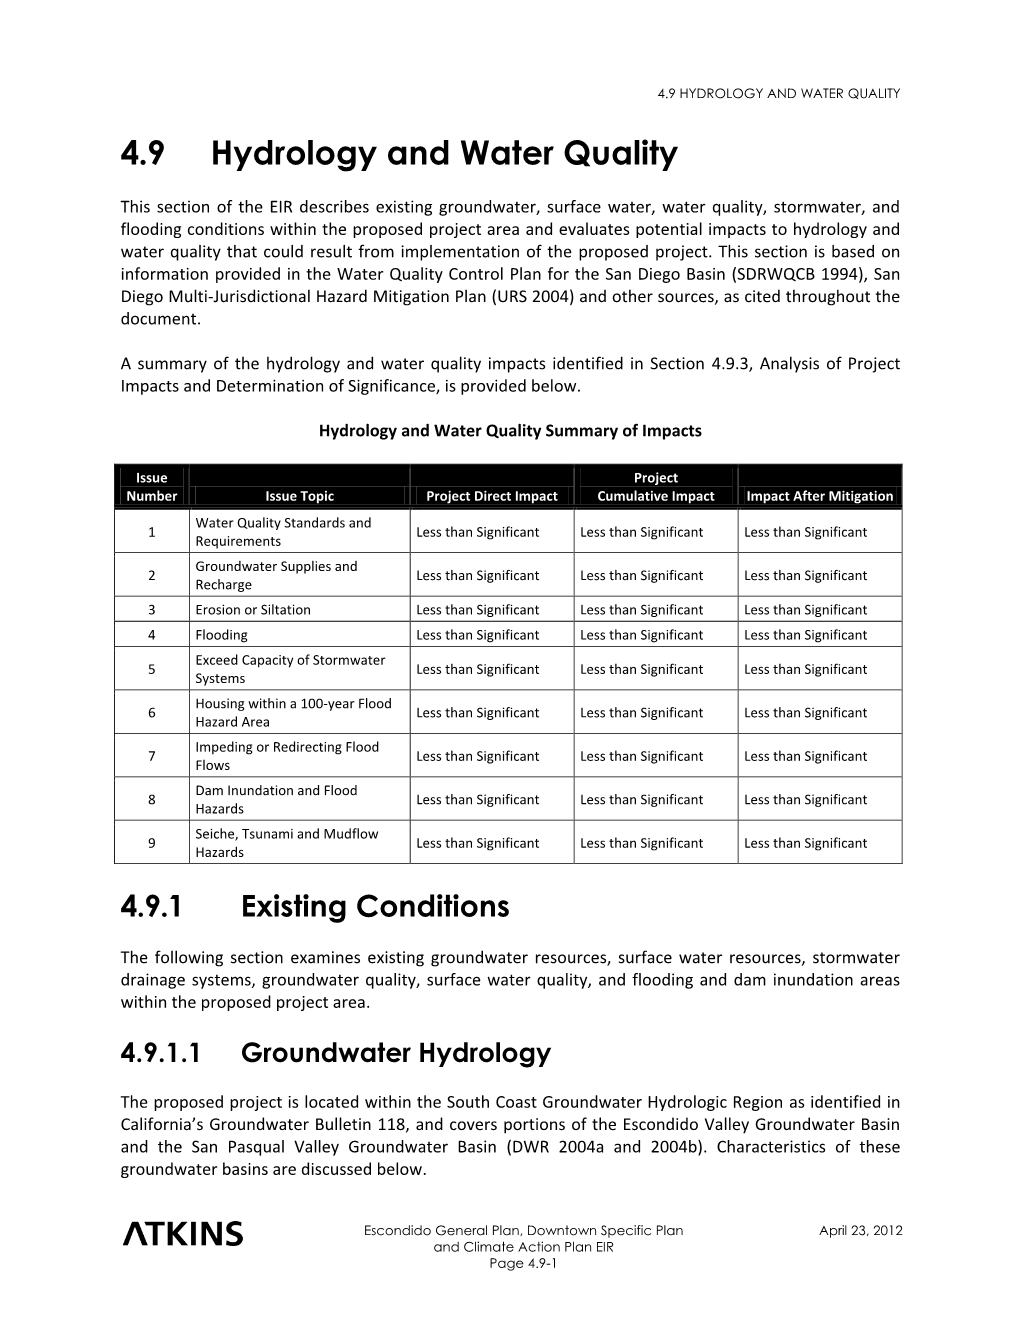 4.9 Hydrology and Water Quality